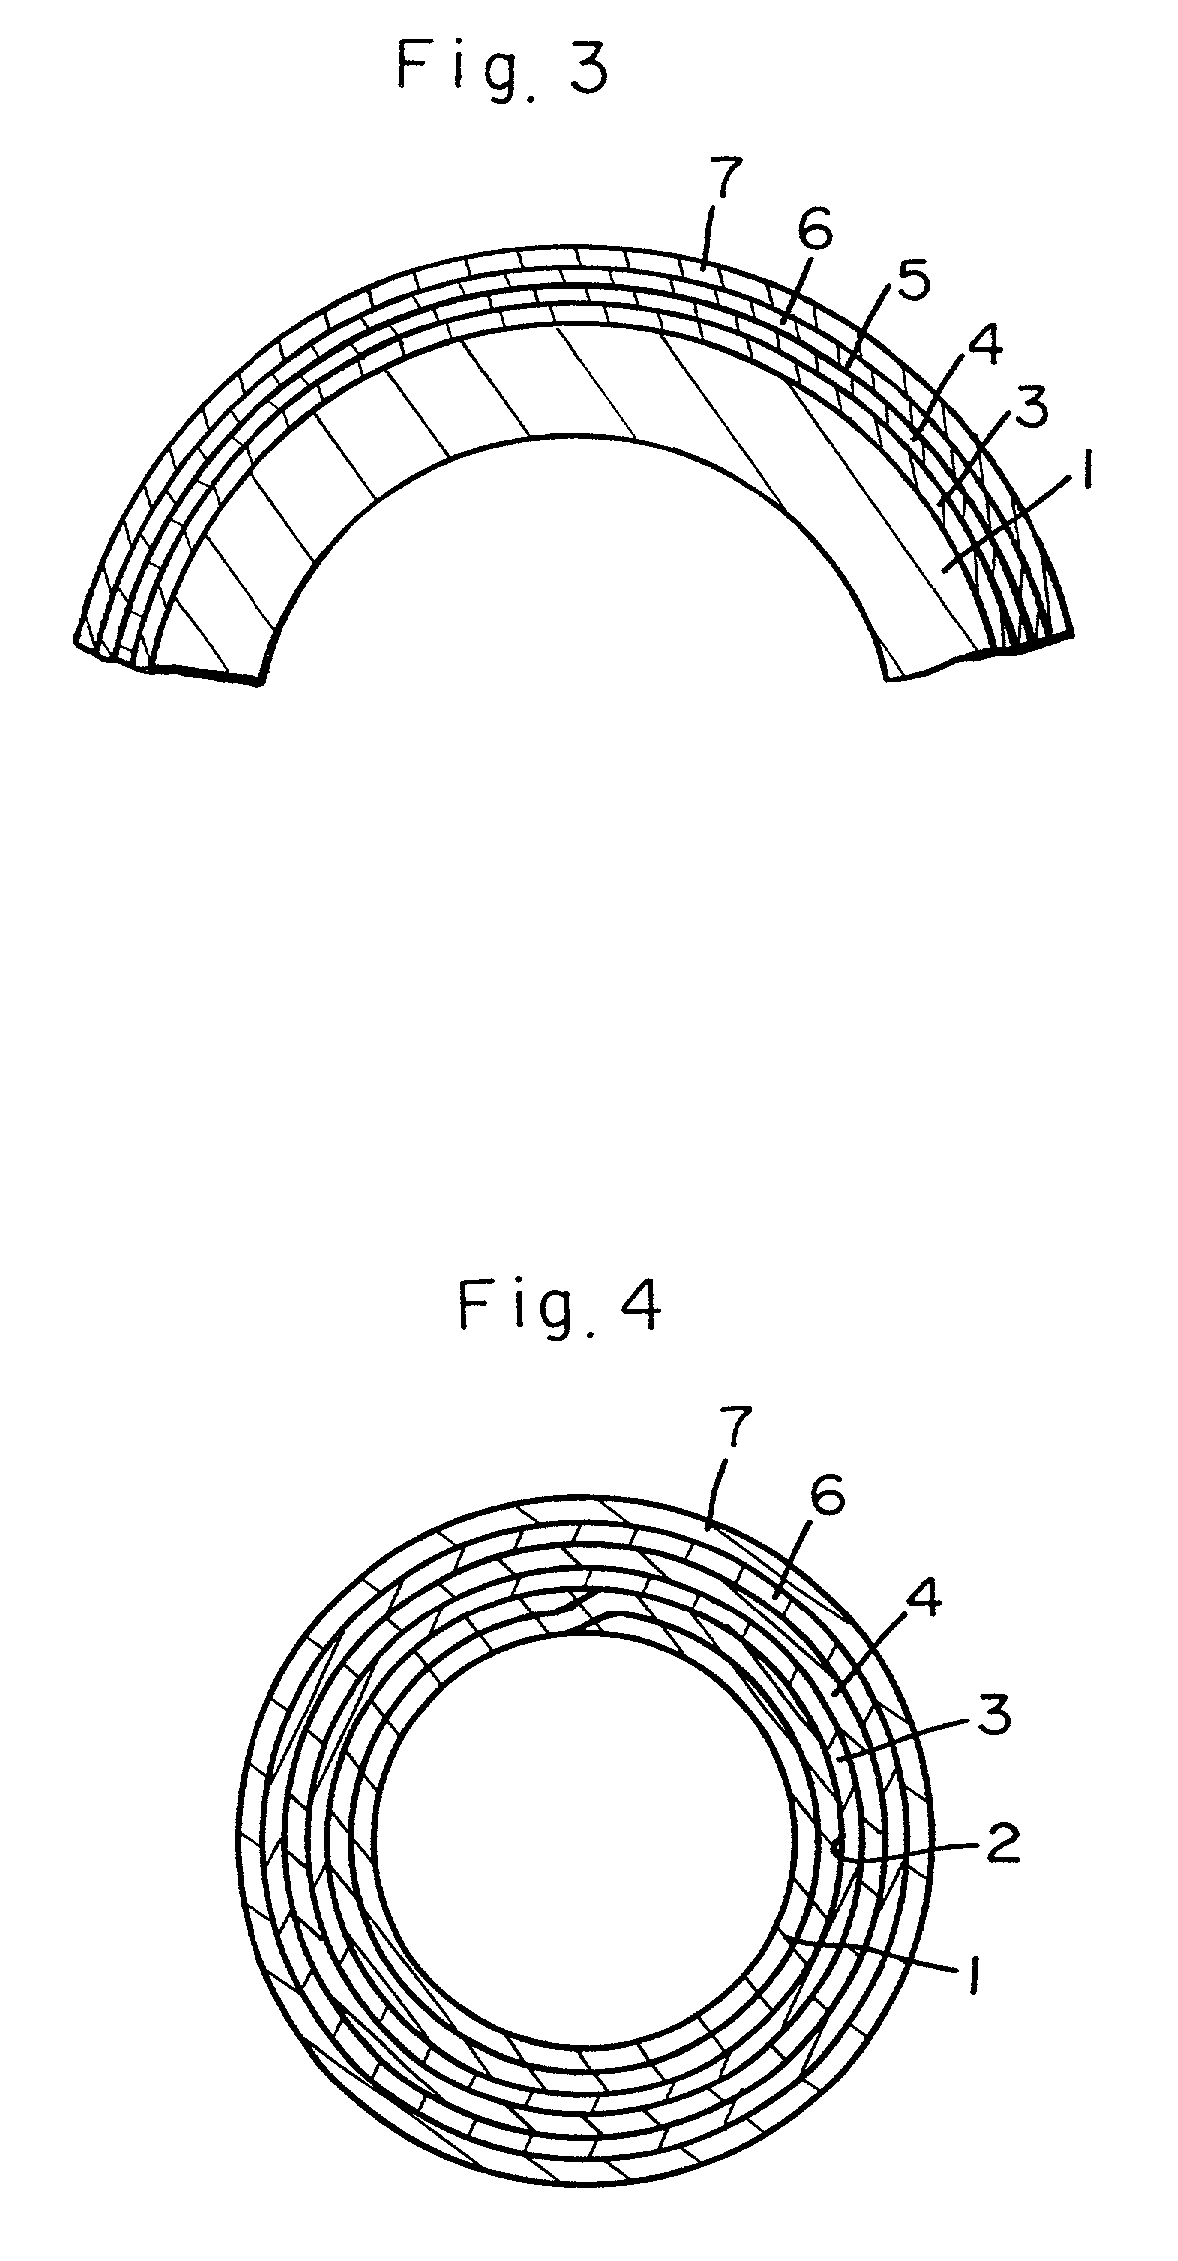 Heat and corrosion resistant steel pipe having multi-layered coating